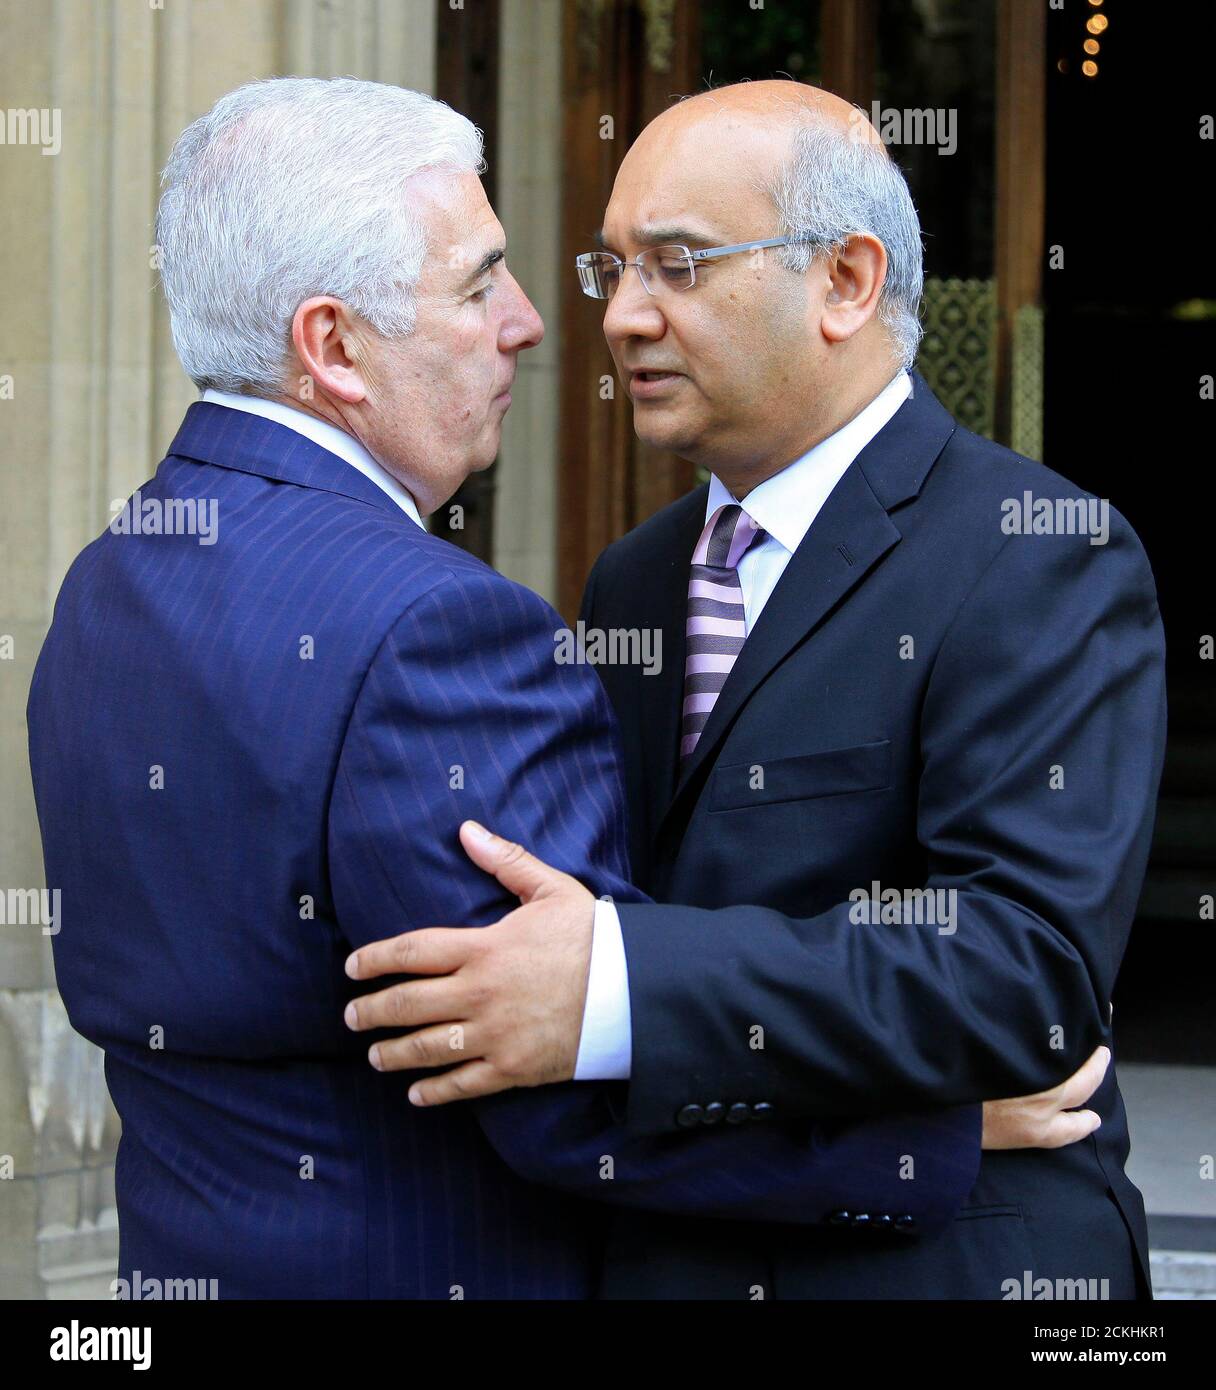 Mitch Winehouse (L), the father of deceased British singer Amy Winehouse, is greeted by MP Keith Vaz as he arrives at the Houses of Parliament in London August 1, 2011. In the wake of singer Amy Winehouse's death, her father Mitch went to Westminster on Monday to press politicians to do more for young people needing help with drug and alcohol problems.    REUTERS/Stefan Wermuth (BRITAIN - Tags: POLITICS ENTERTAINMENT SOCIETY) Stock Photo